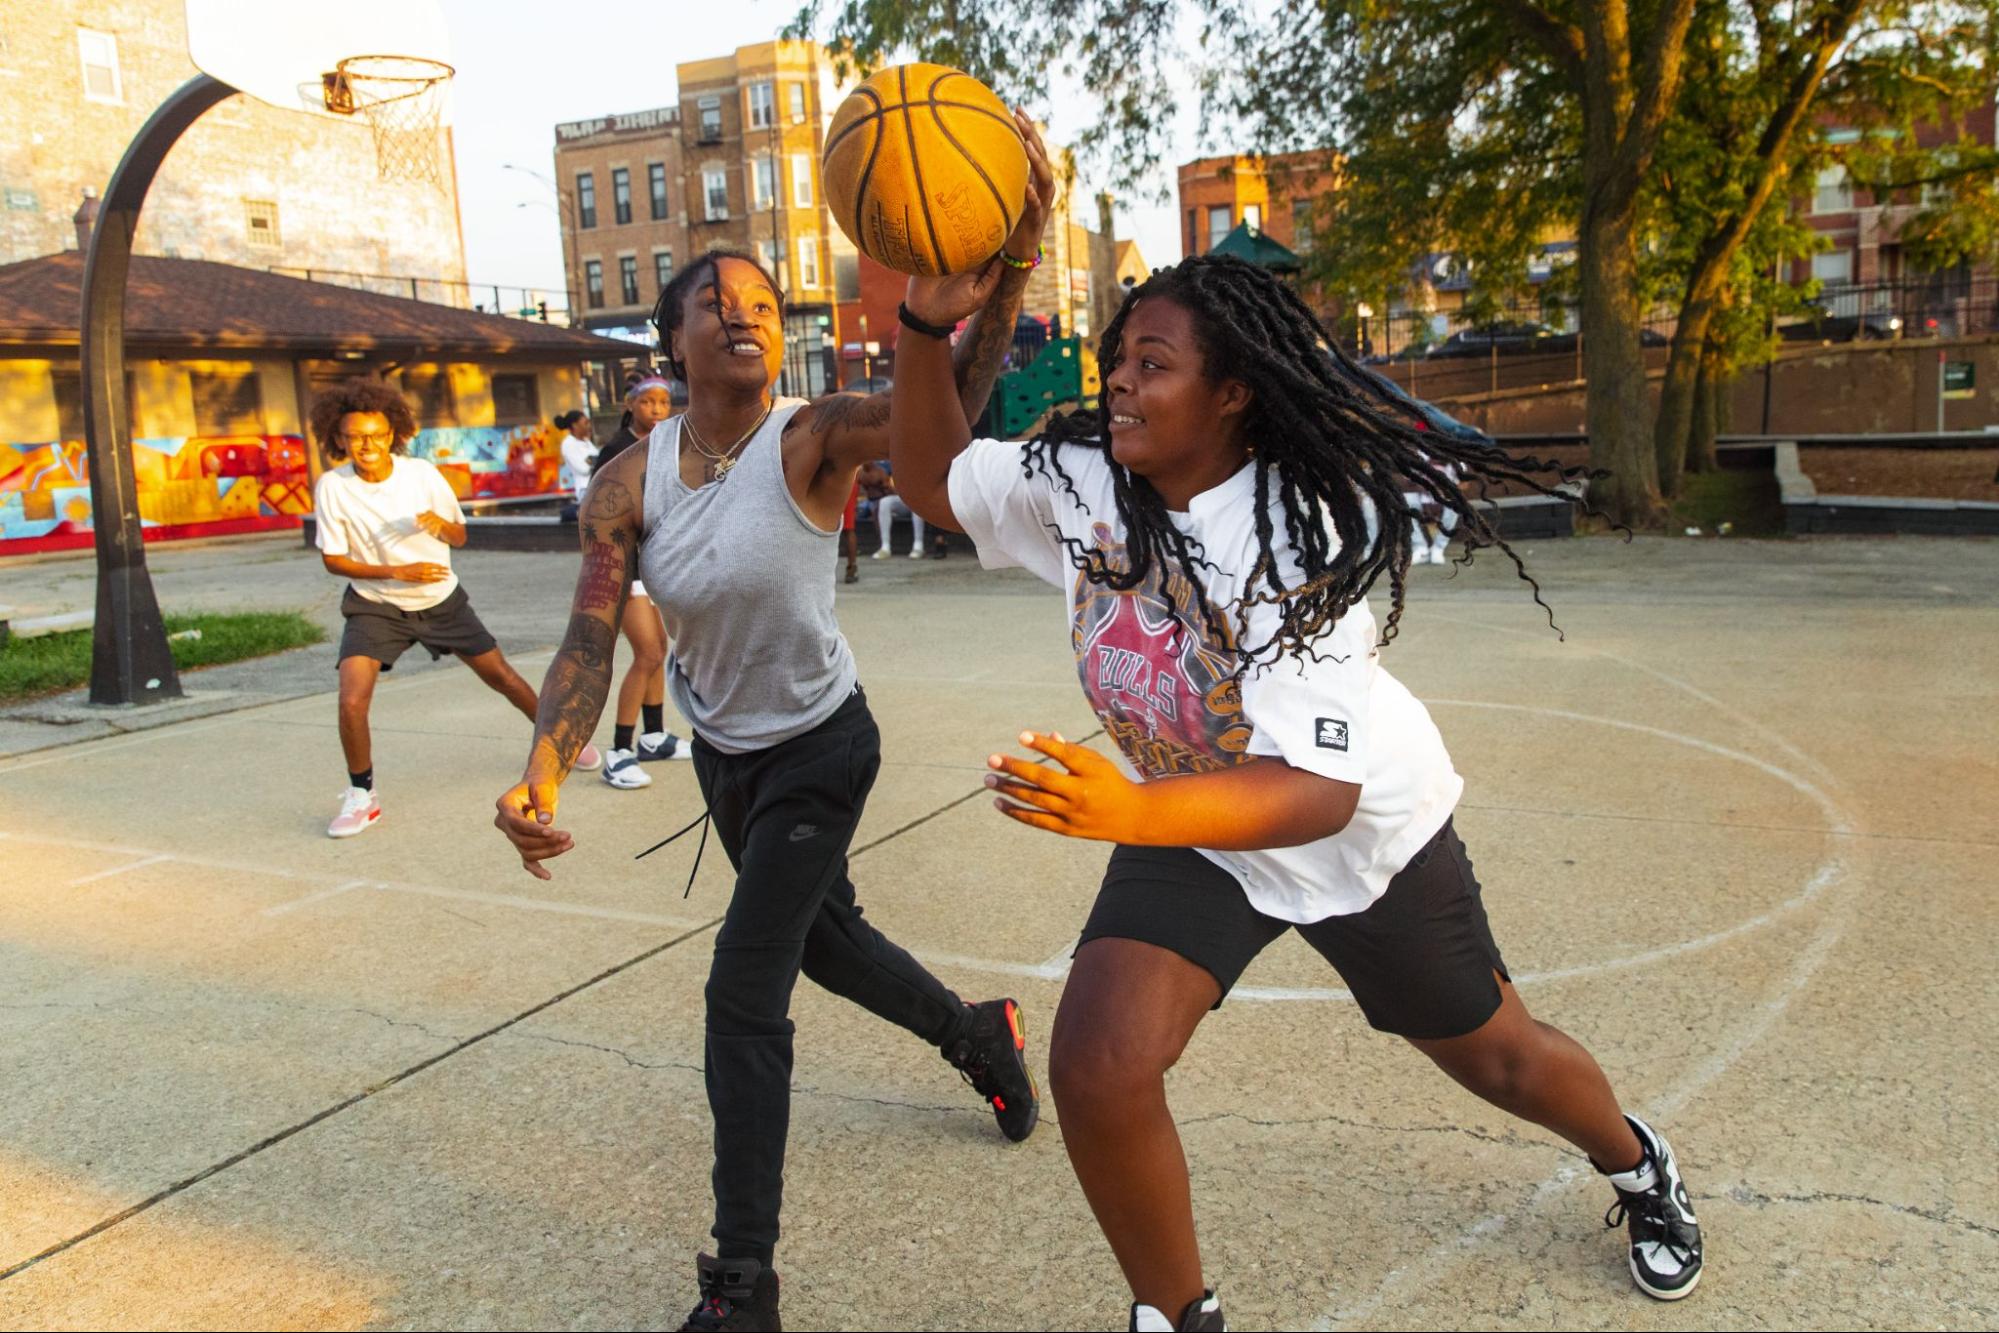 People playing basketball on a court in Chicago as photographed by Vashon Jordan Jr. for Black History Month